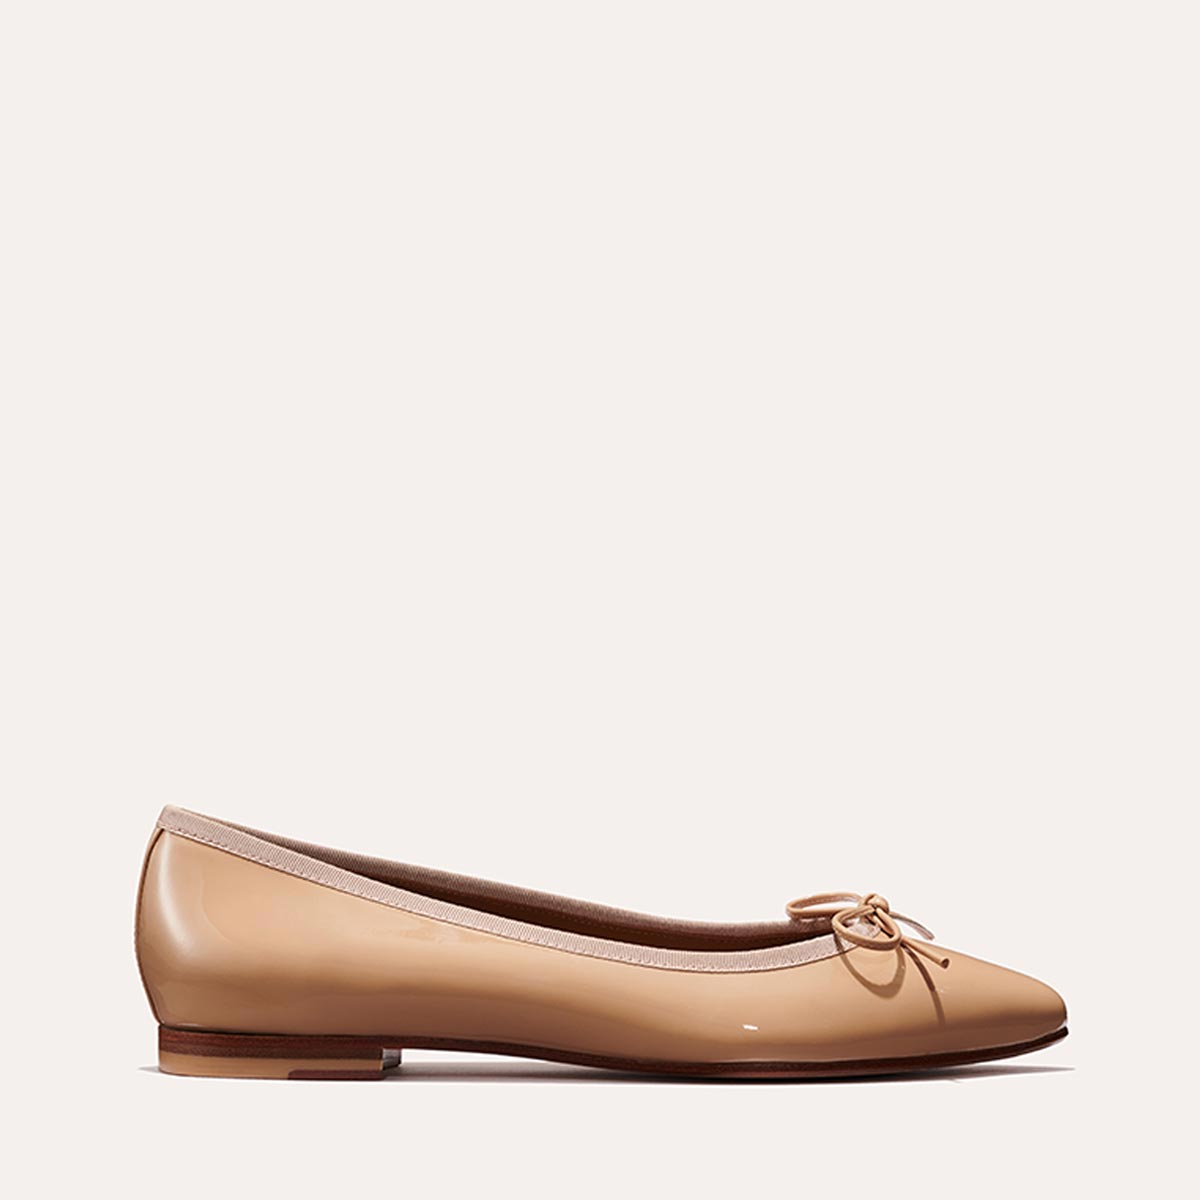 Margaux's classic and comfortable Pointe ballet flat in nude patent Italian leather with an elegant pointed toe